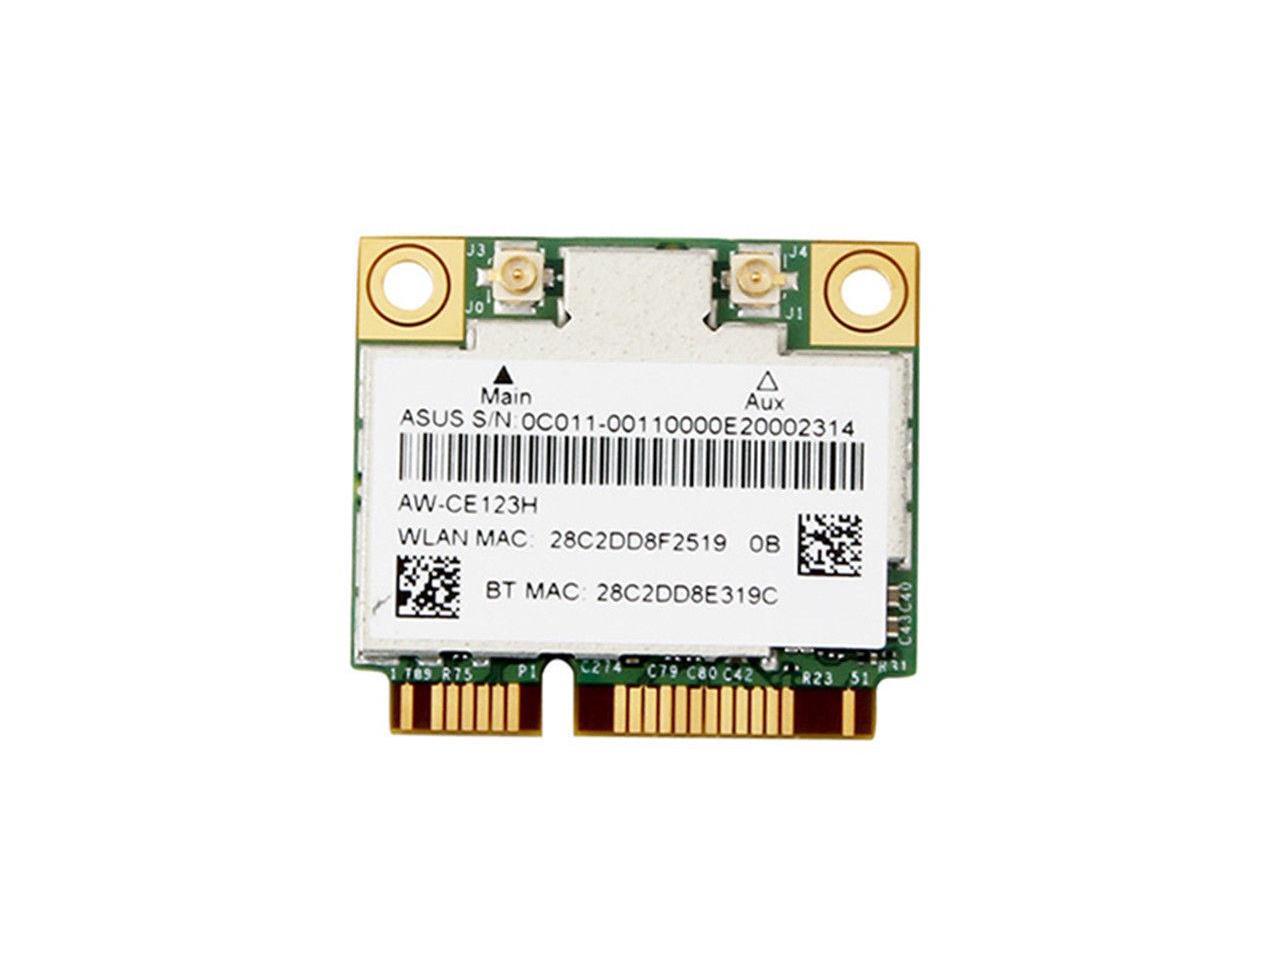 what is azurewave bluetooth card used for